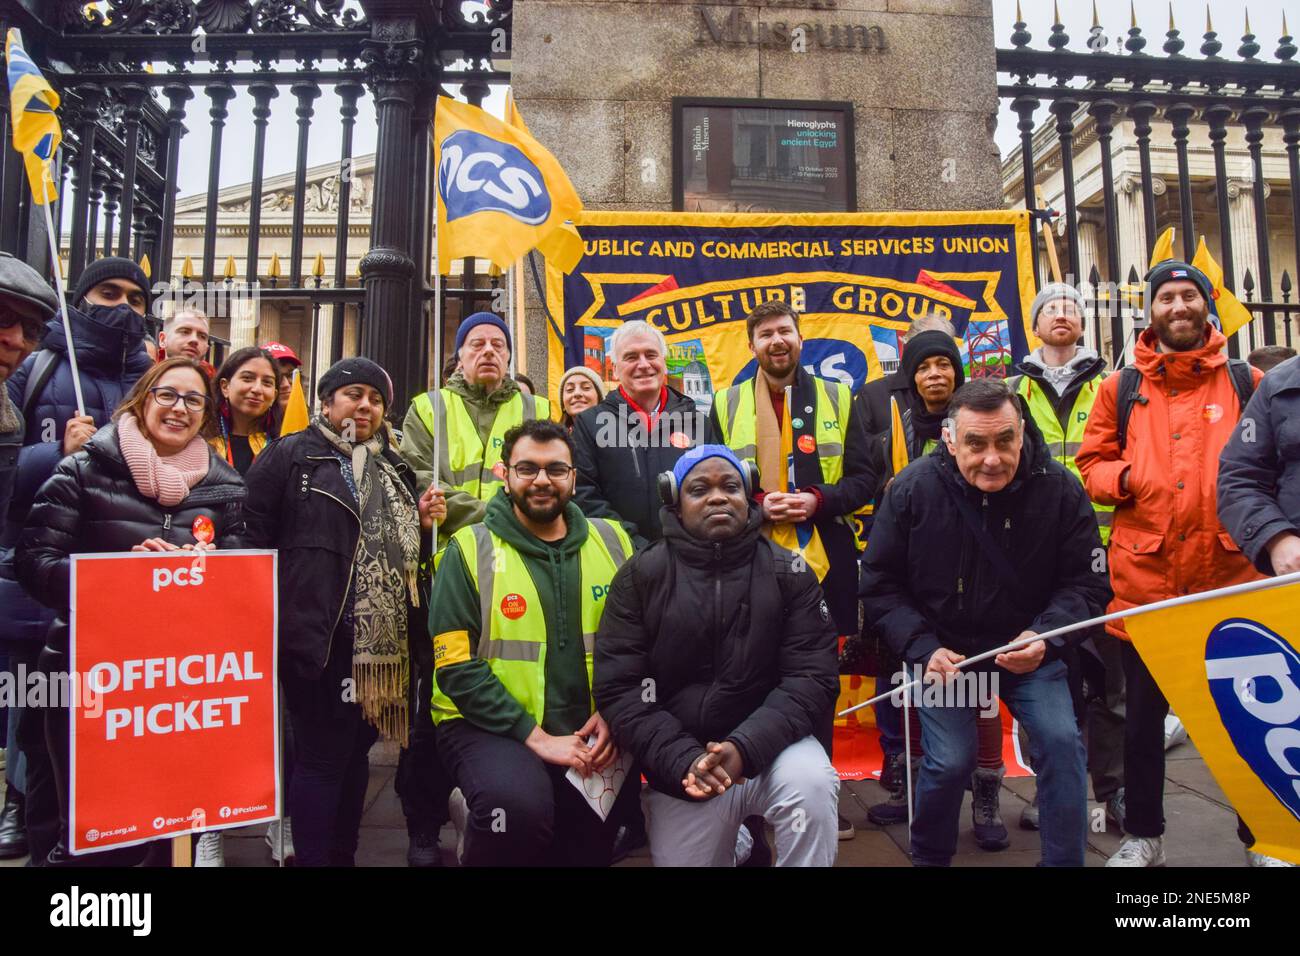 London, UK. 16th February 2023. Labour MP John McDonnell joins the PCS (Public and Commercial Services Union) picket outside The British Museum, as staff continue their strike over pay on the fourth consecutive day. Credit: Vuk Valcic/Alamy Live News Stock Photo